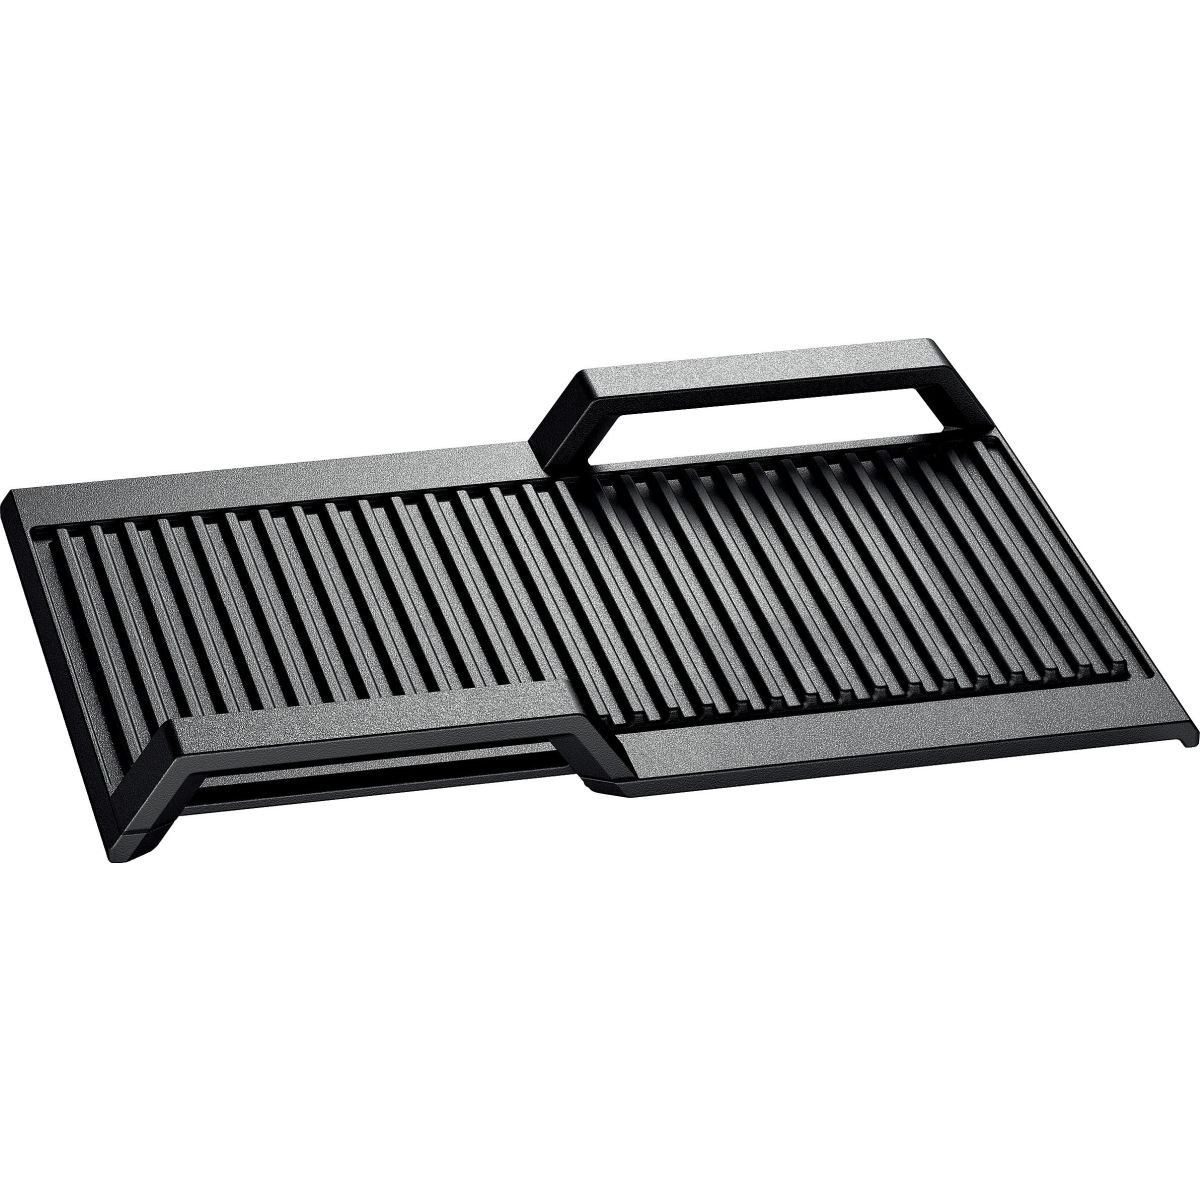 Ribbet grillplate for Flexinduction